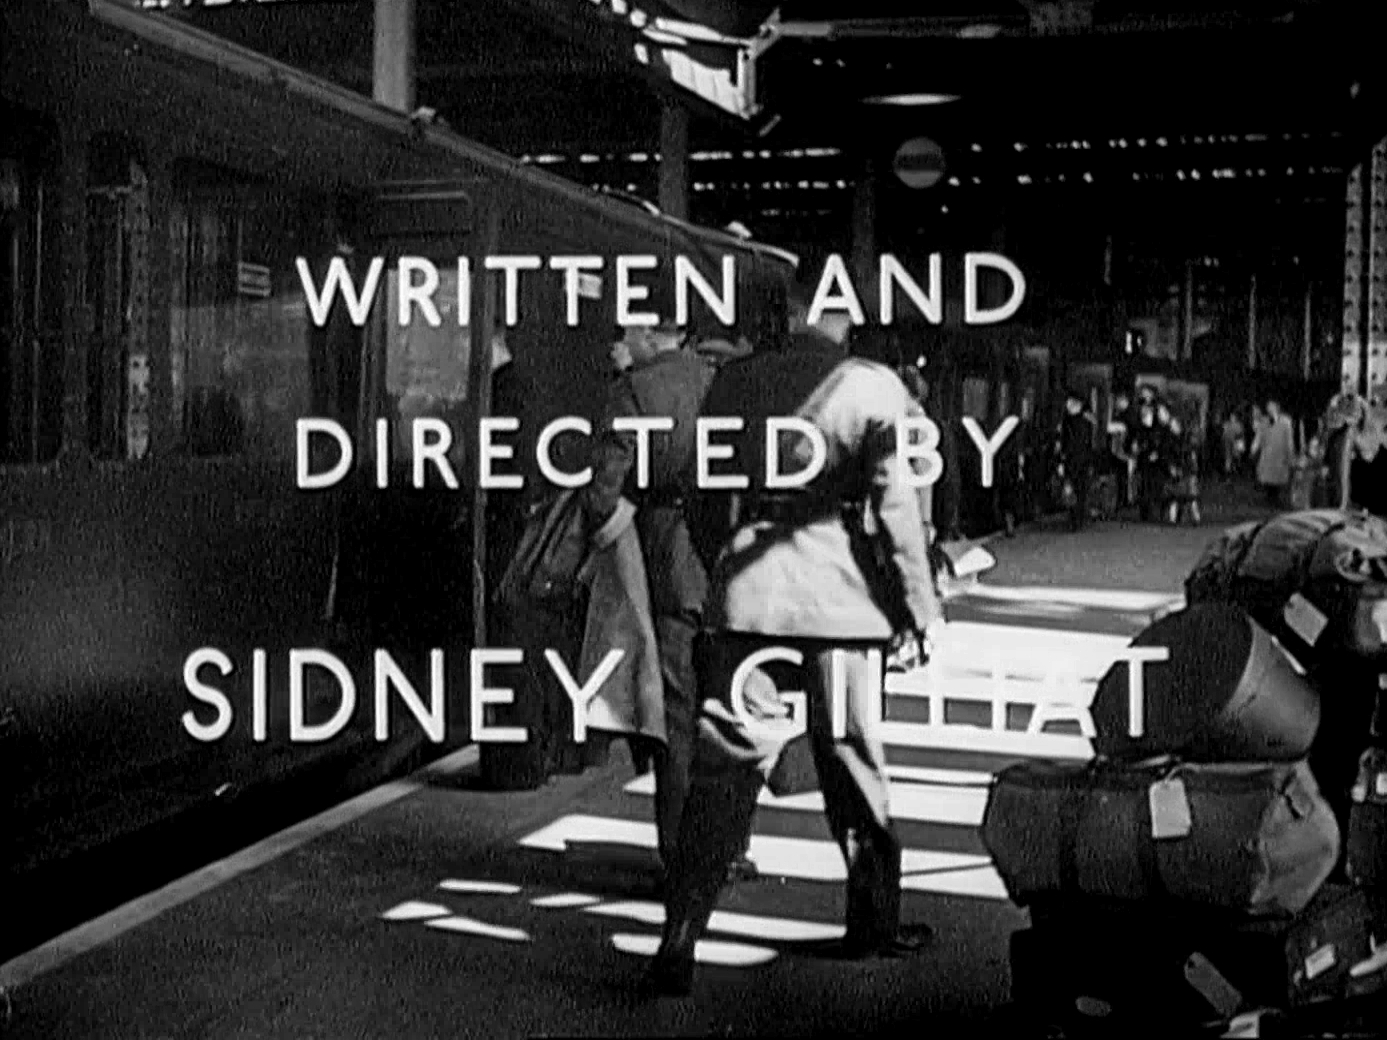 Main title from Waterloo Road (1945) (11). Written ad directed by Sidney Gilliat